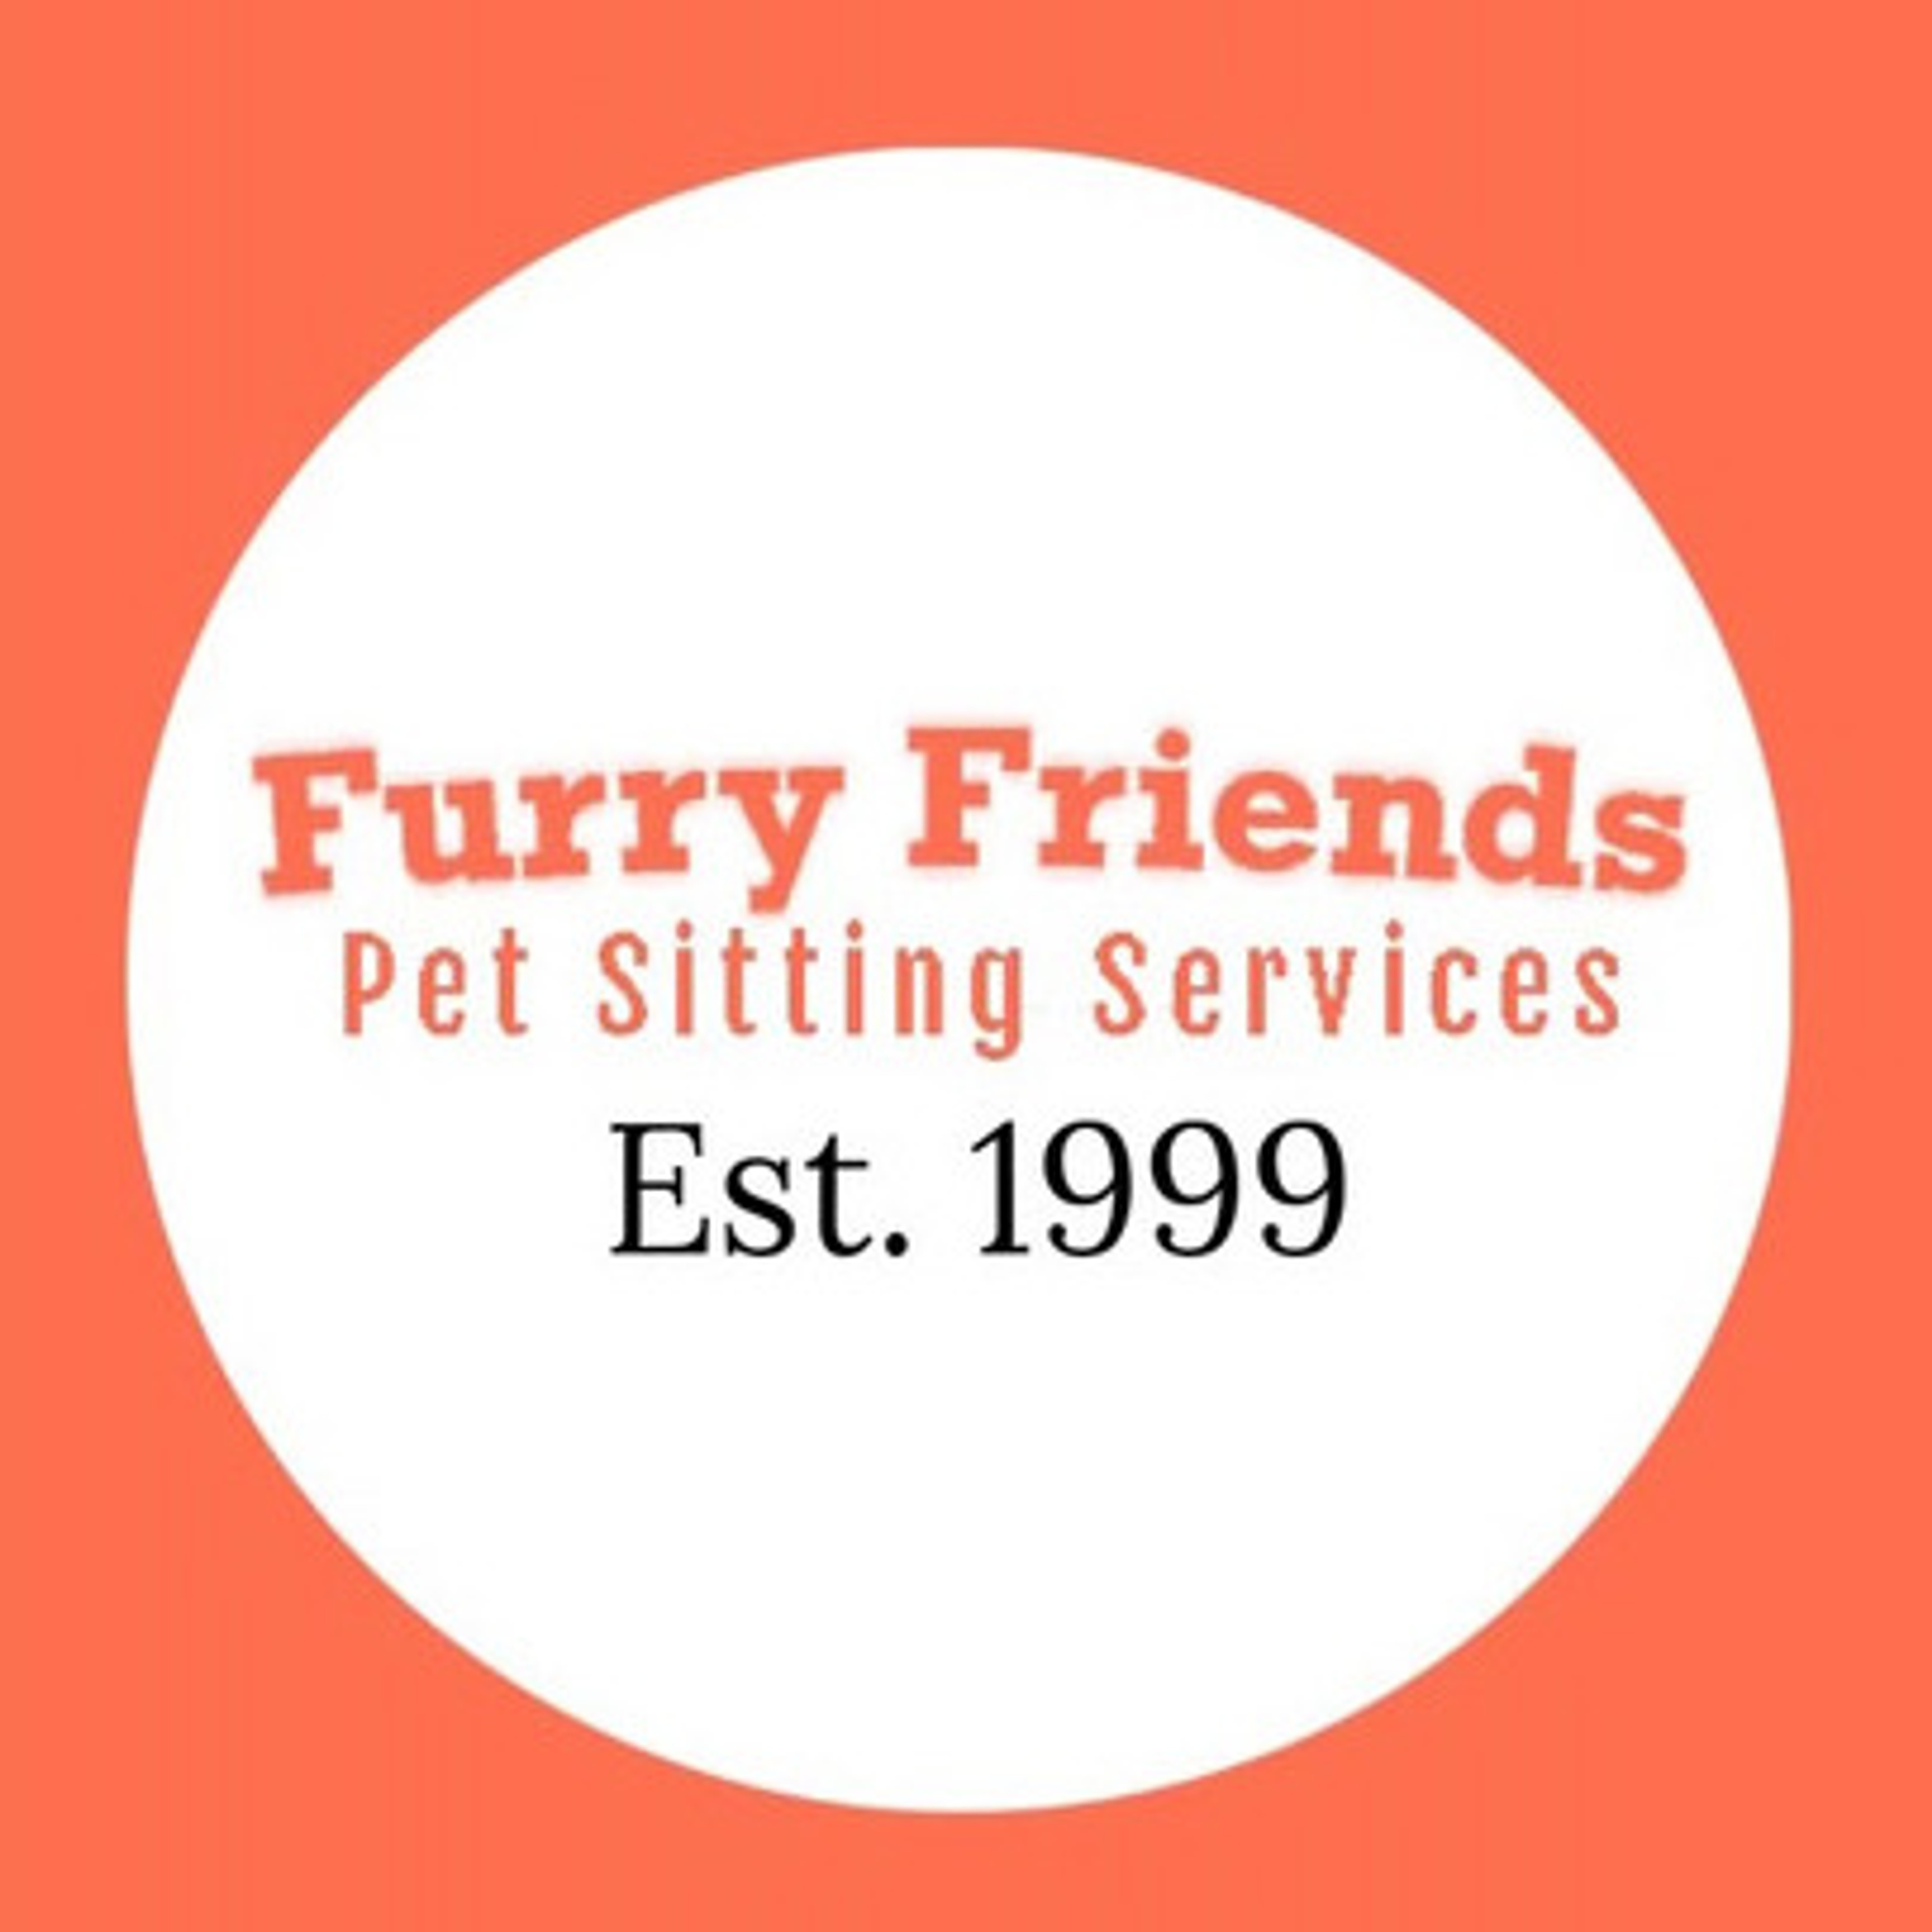 Professional Pet Sitting Services Catering To Healthy and Special Needs Pets !